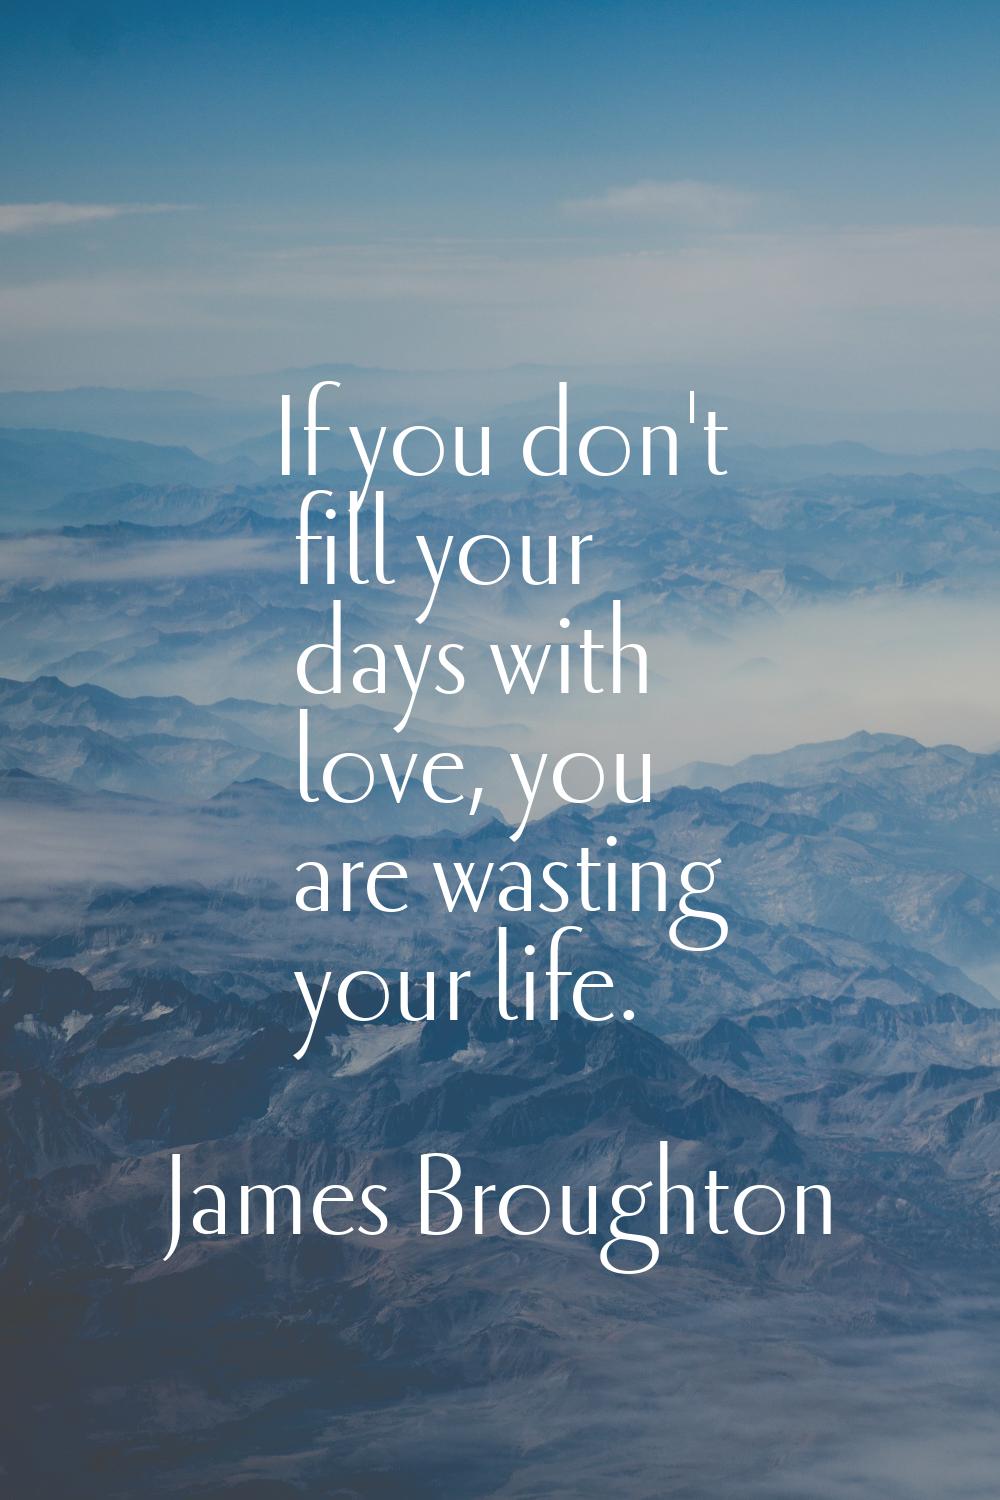 If you don't fill your days with love, you are wasting your life.